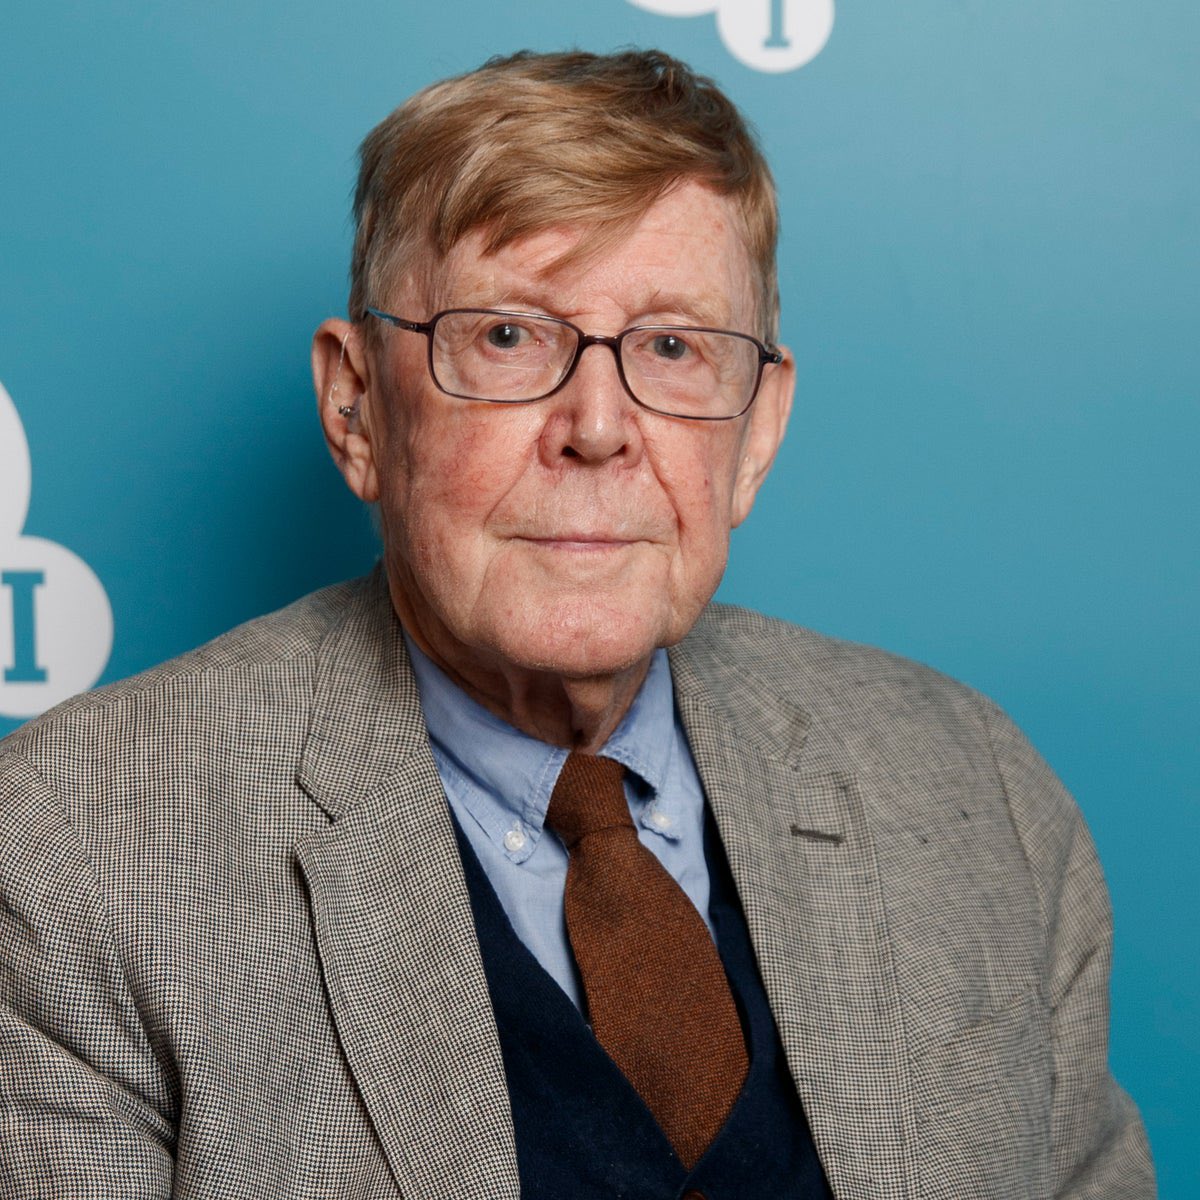 Alan Bennett, one of our greatest authors and playwrights, is 90 years old today. To paraphrase the great man … growing old, it’s one f*** ing year after another. Happy birthday Alan.